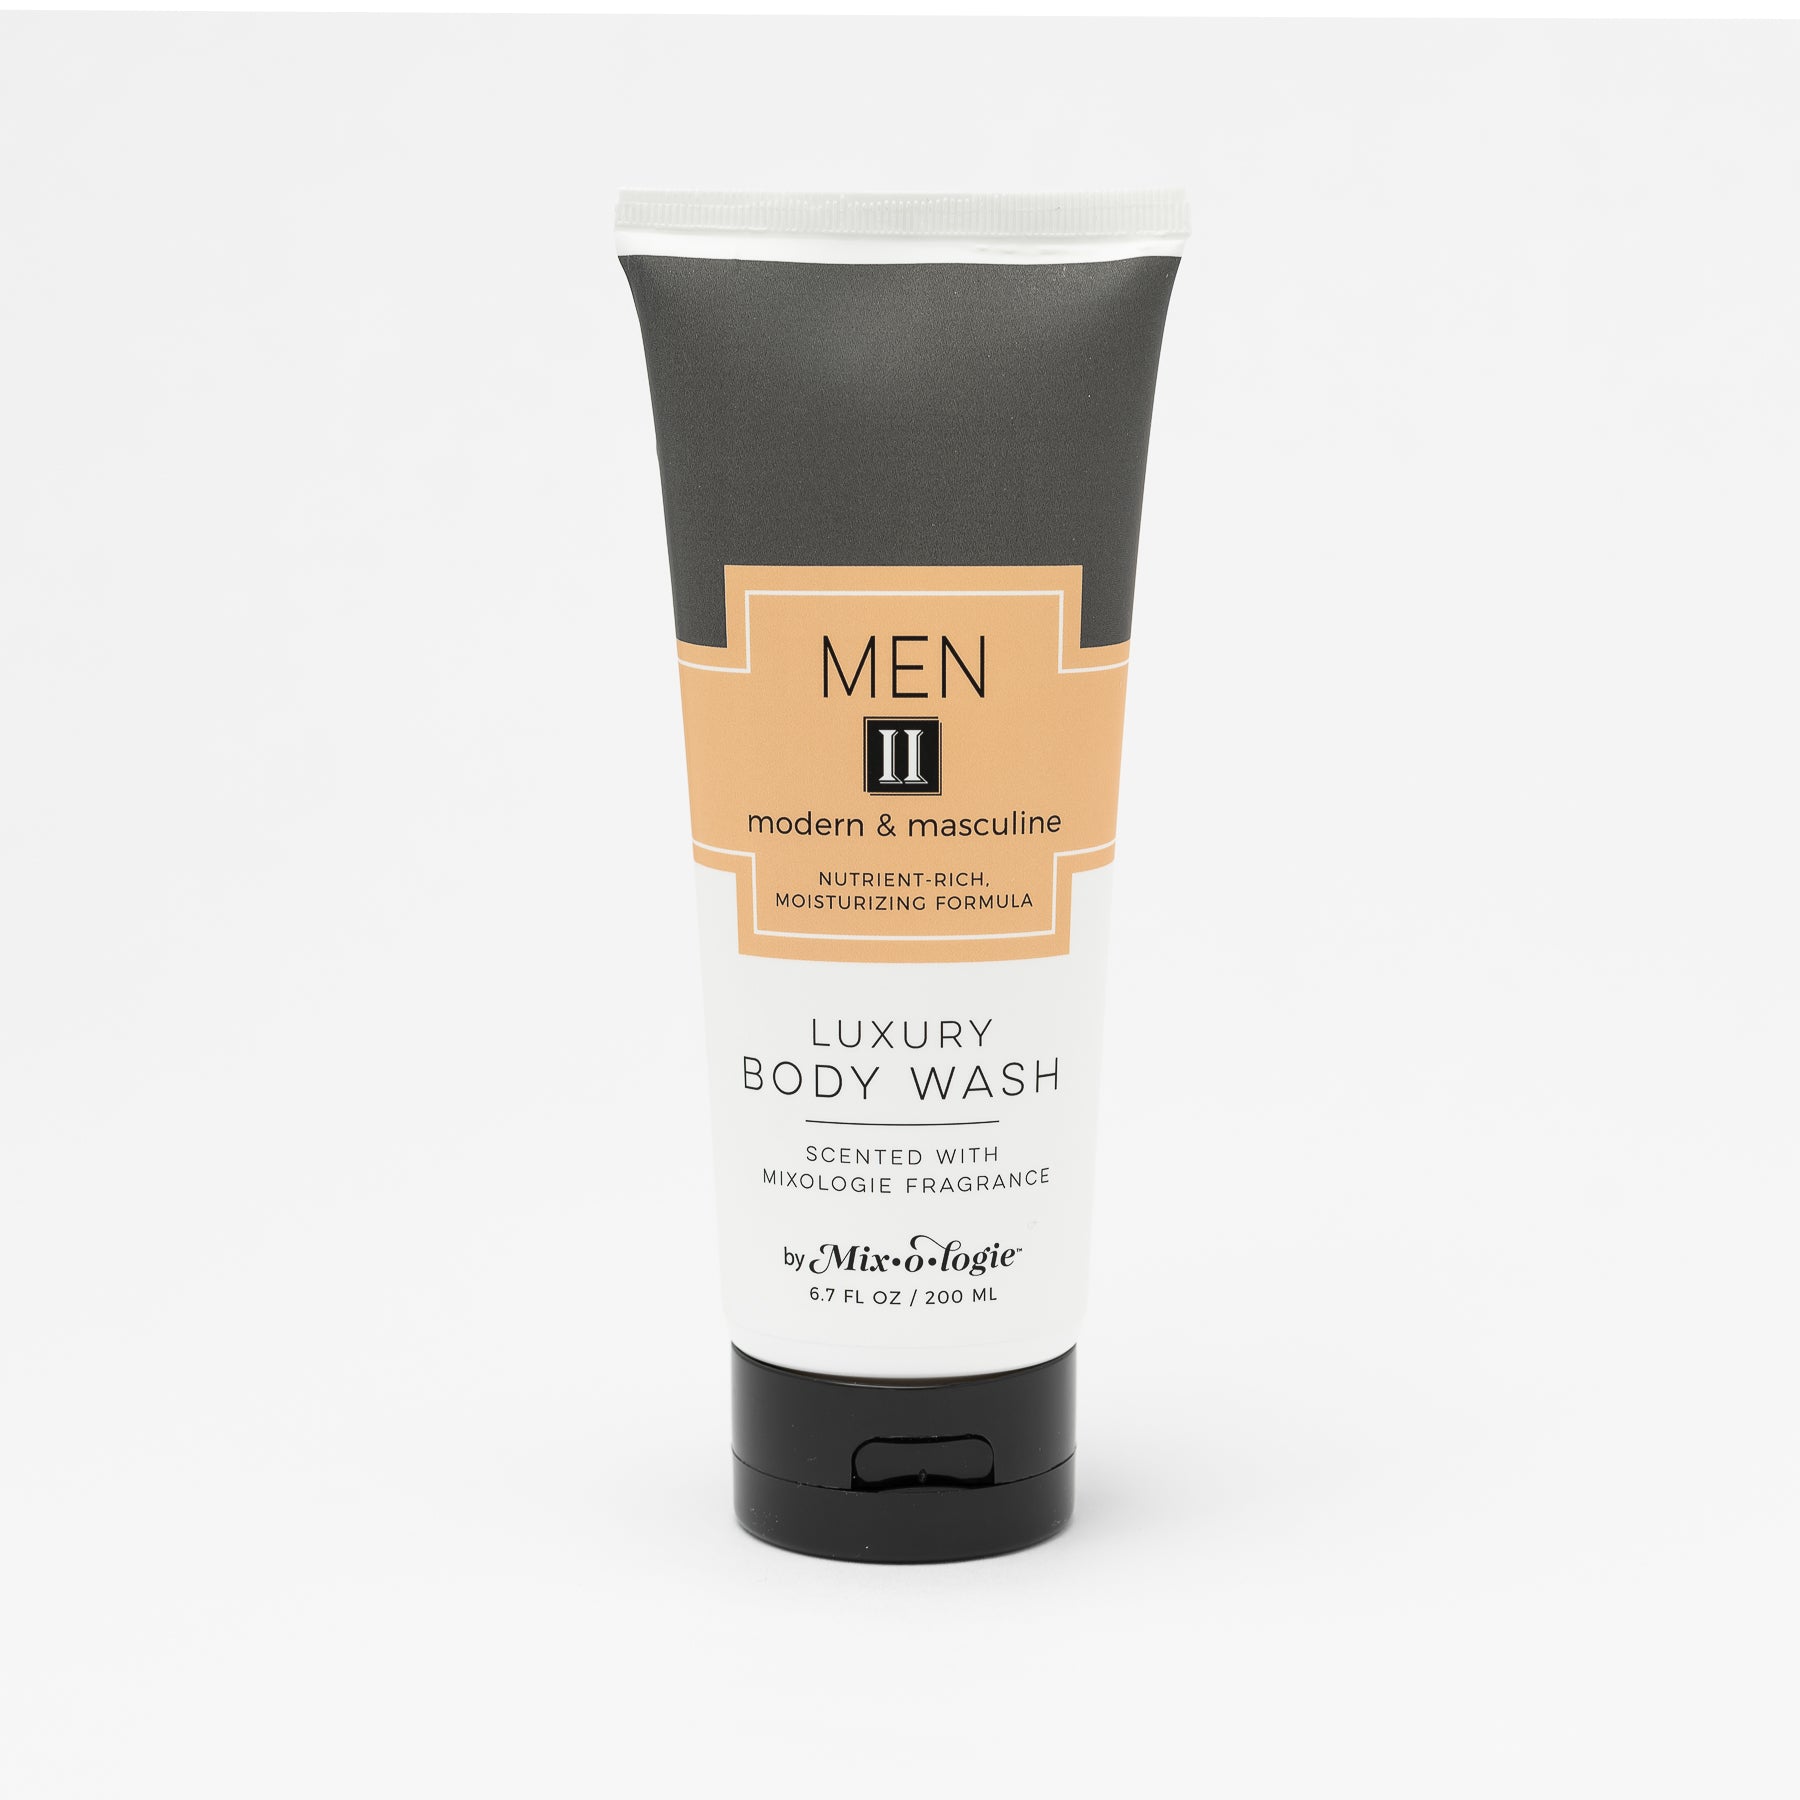 Luxury Body Wash in Men II (Modern & Masculine) in grey color package with yellow label in white background.